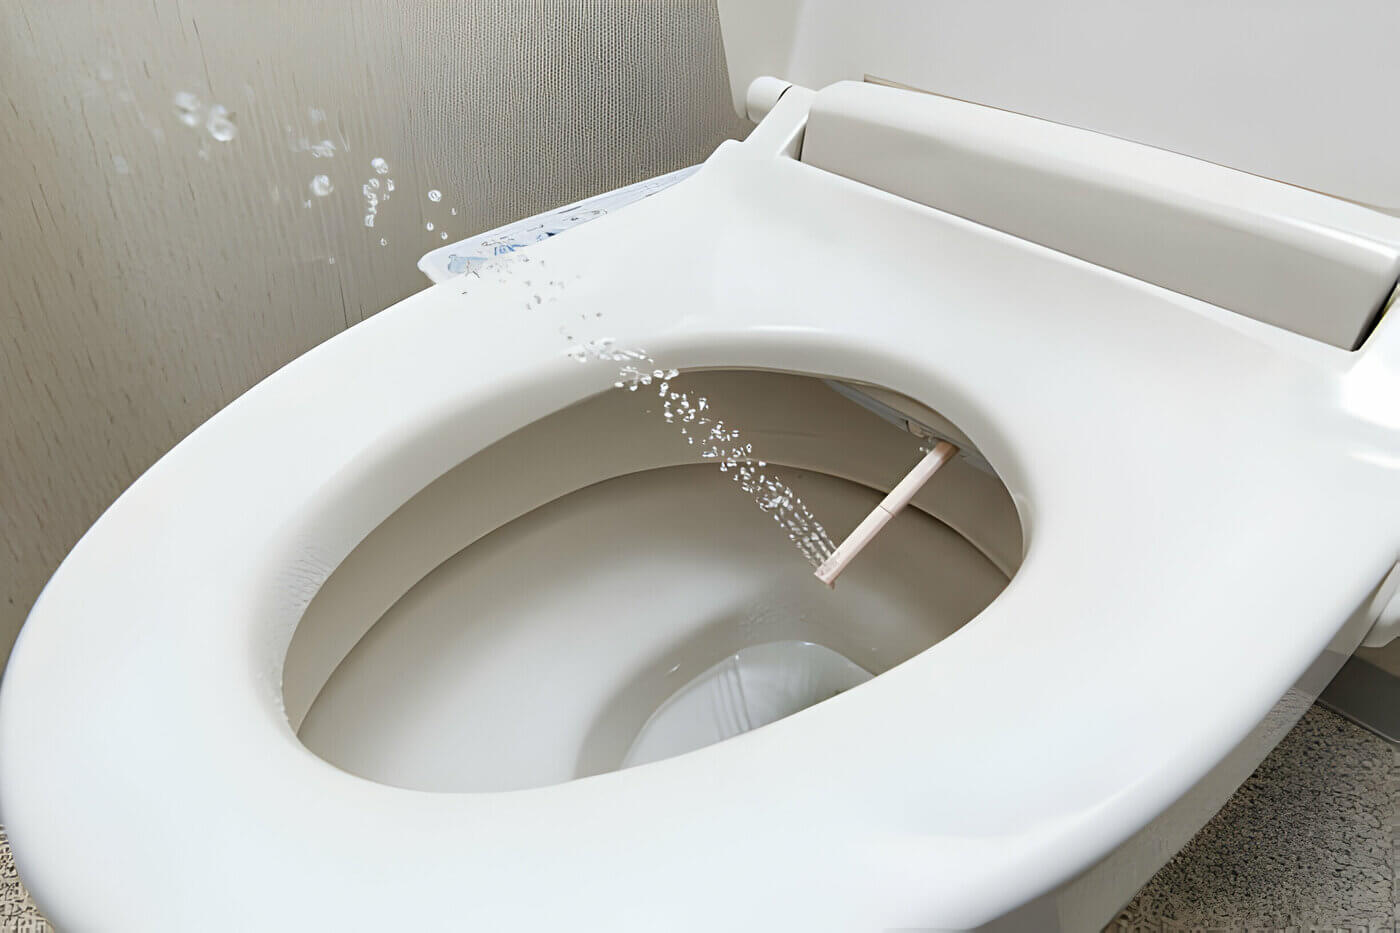 spray bidet feature of the Japanese toilet